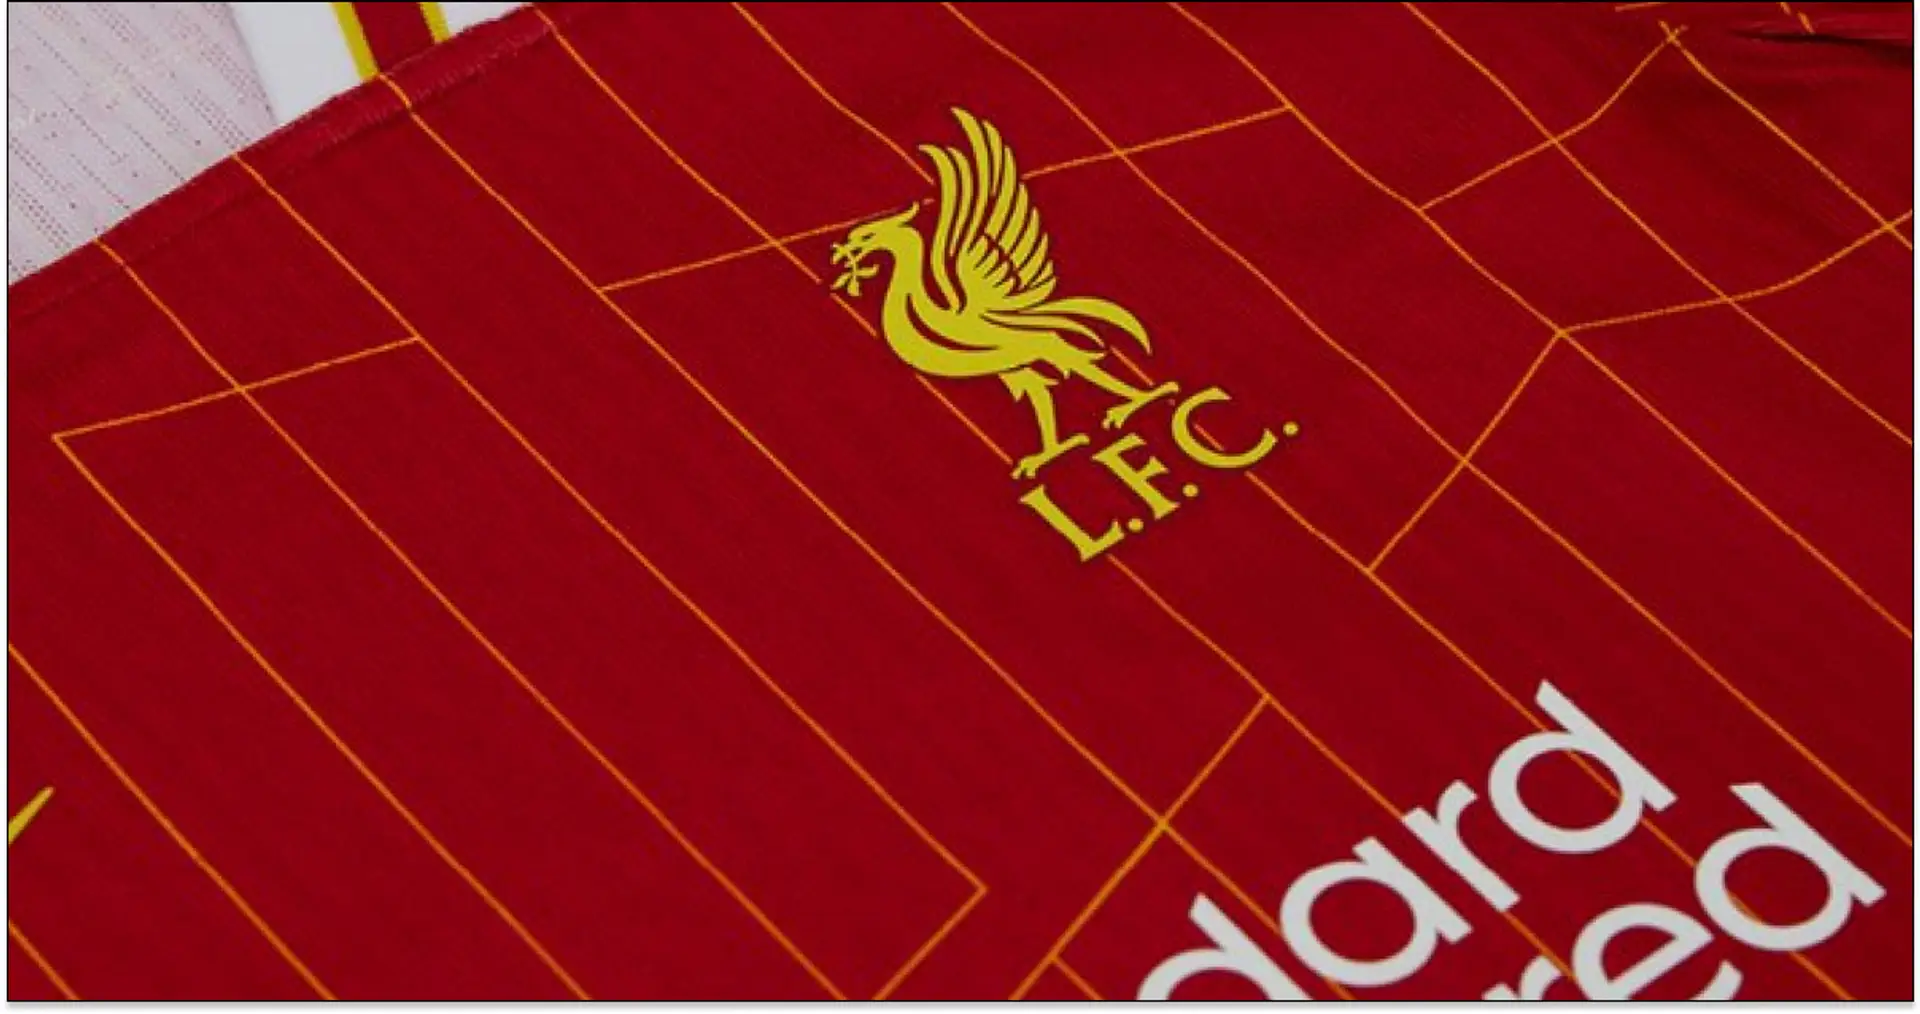 Liverpool release new kit & 2 other big stories you could've missed